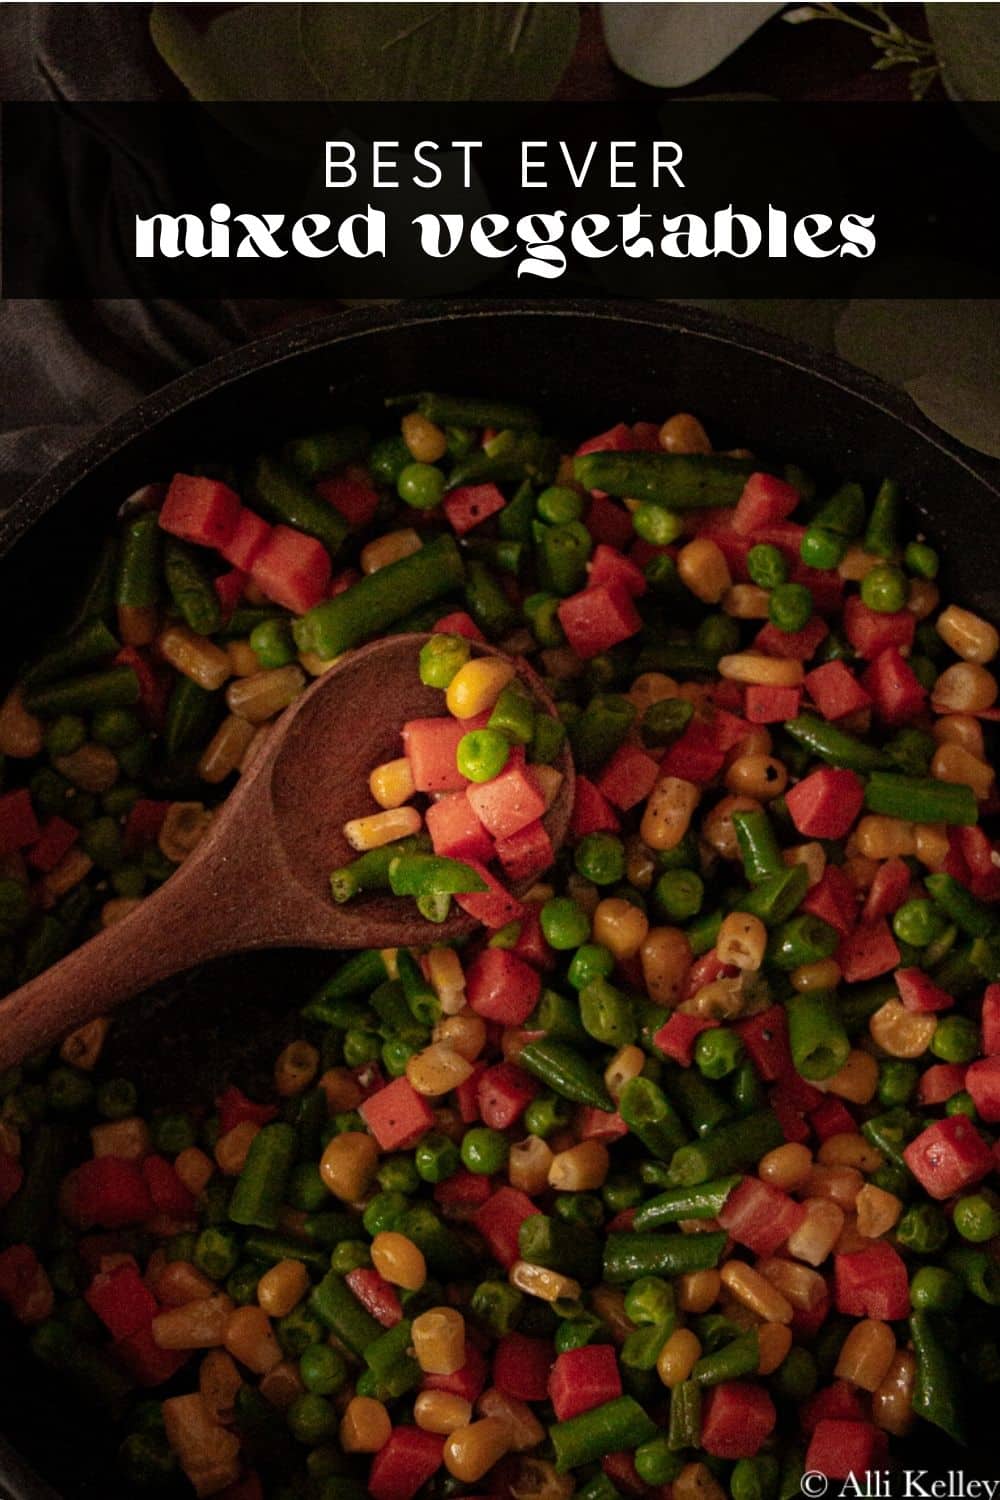 Take your frozen mixed vegetables to the next level with this simple recipe! Perfectly seasoned, full of flavor, and never soggy, you won’t go back to plain frozen vegetables again. No extra steps or special ingredients required!